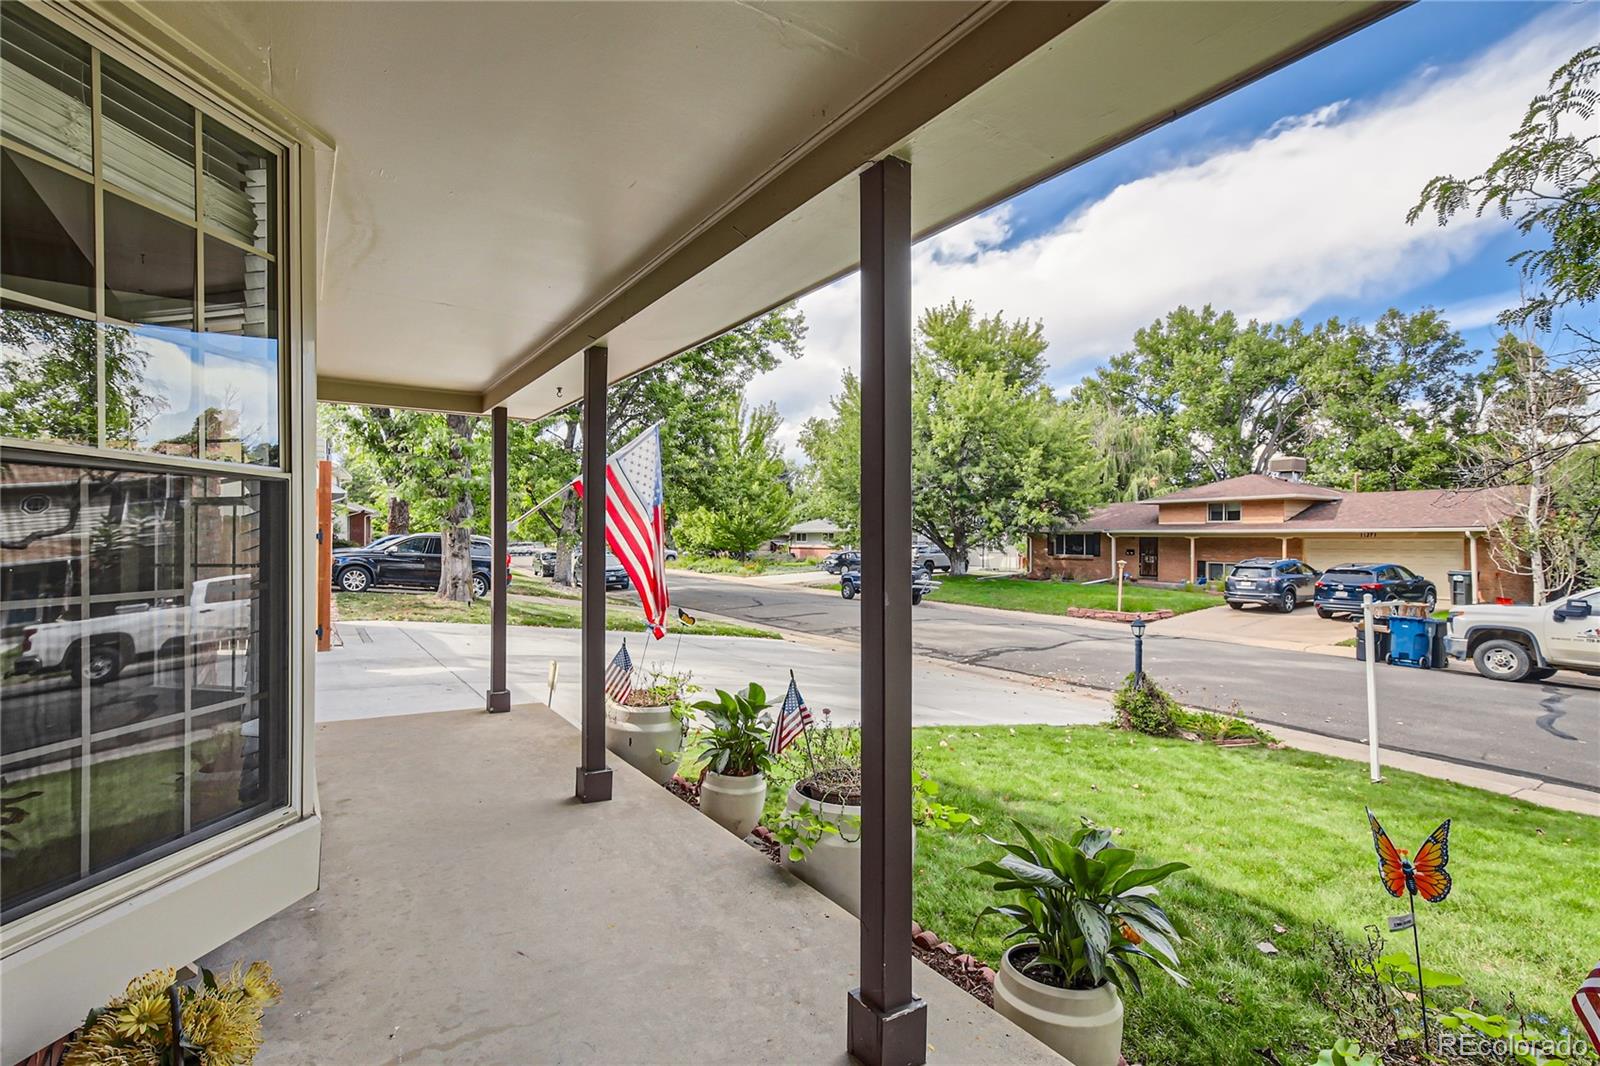 Report Image for 11260 W 27th Place,Lakewood, Colorado